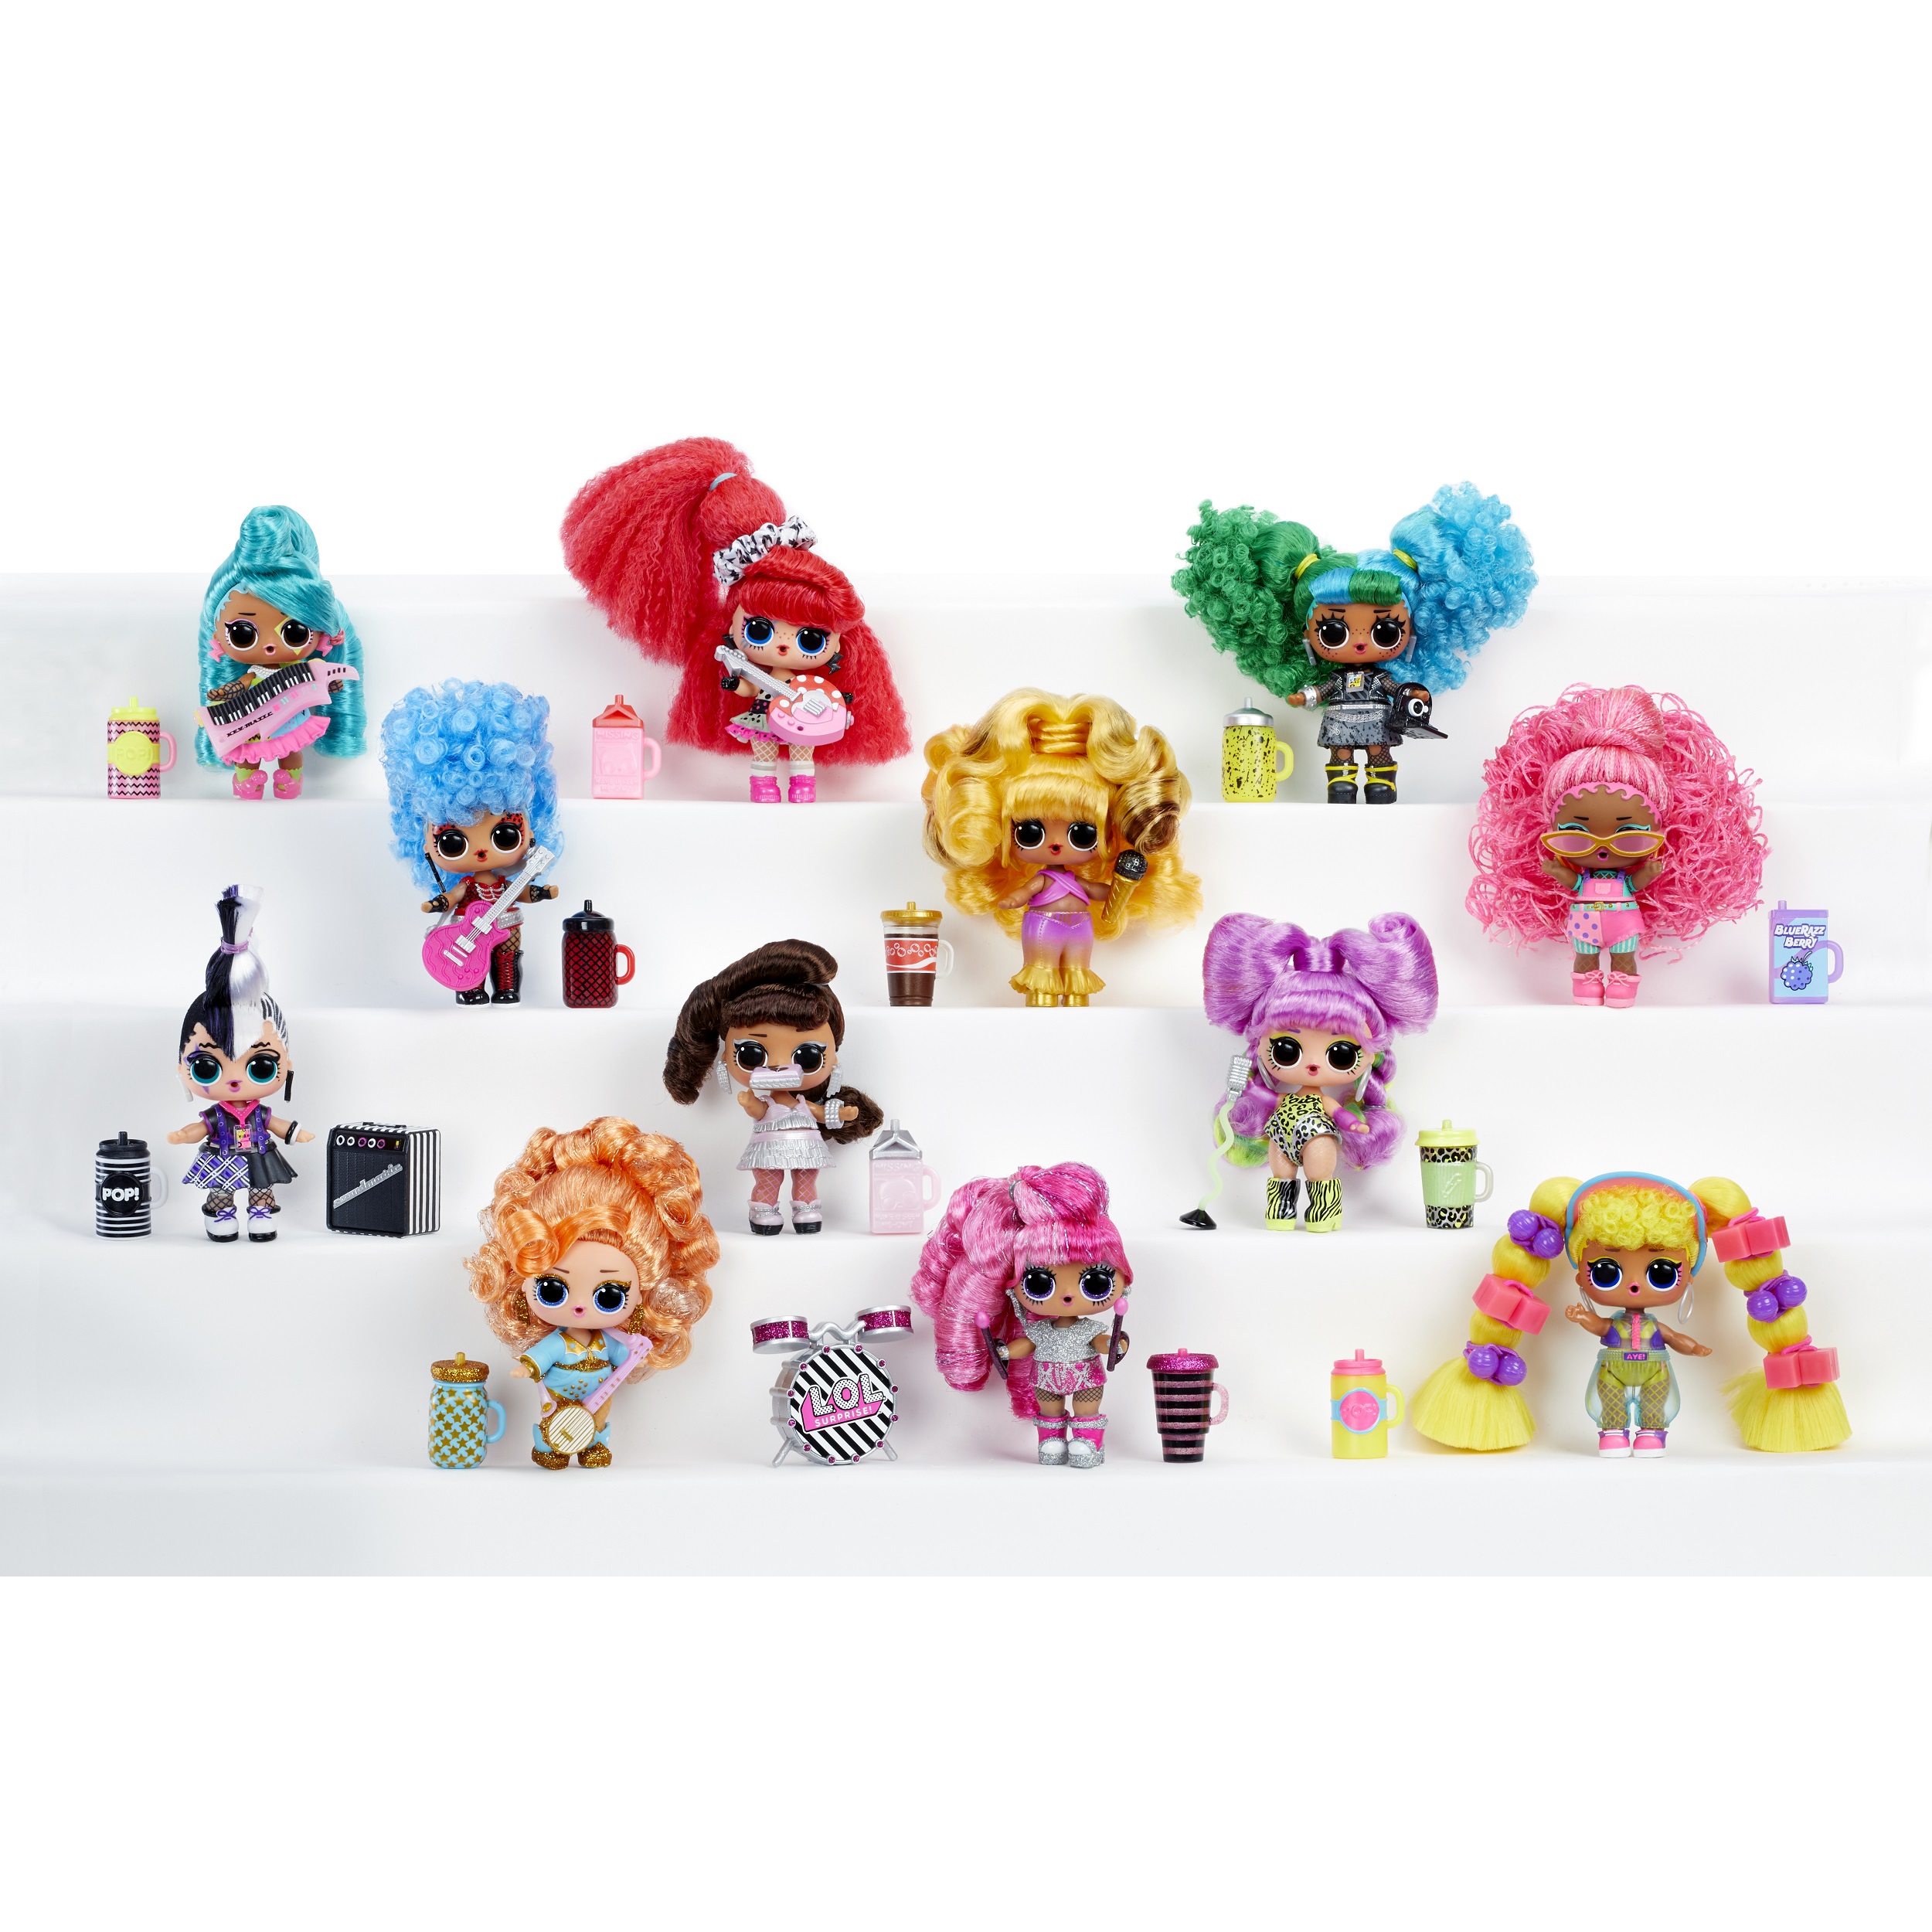 LOL Surprise Remix Hair Flip Dolls - 15 Surprises With Hair Reveal & Music, Great Gift for Kids Ages 4 5 6+ - image 6 of 6